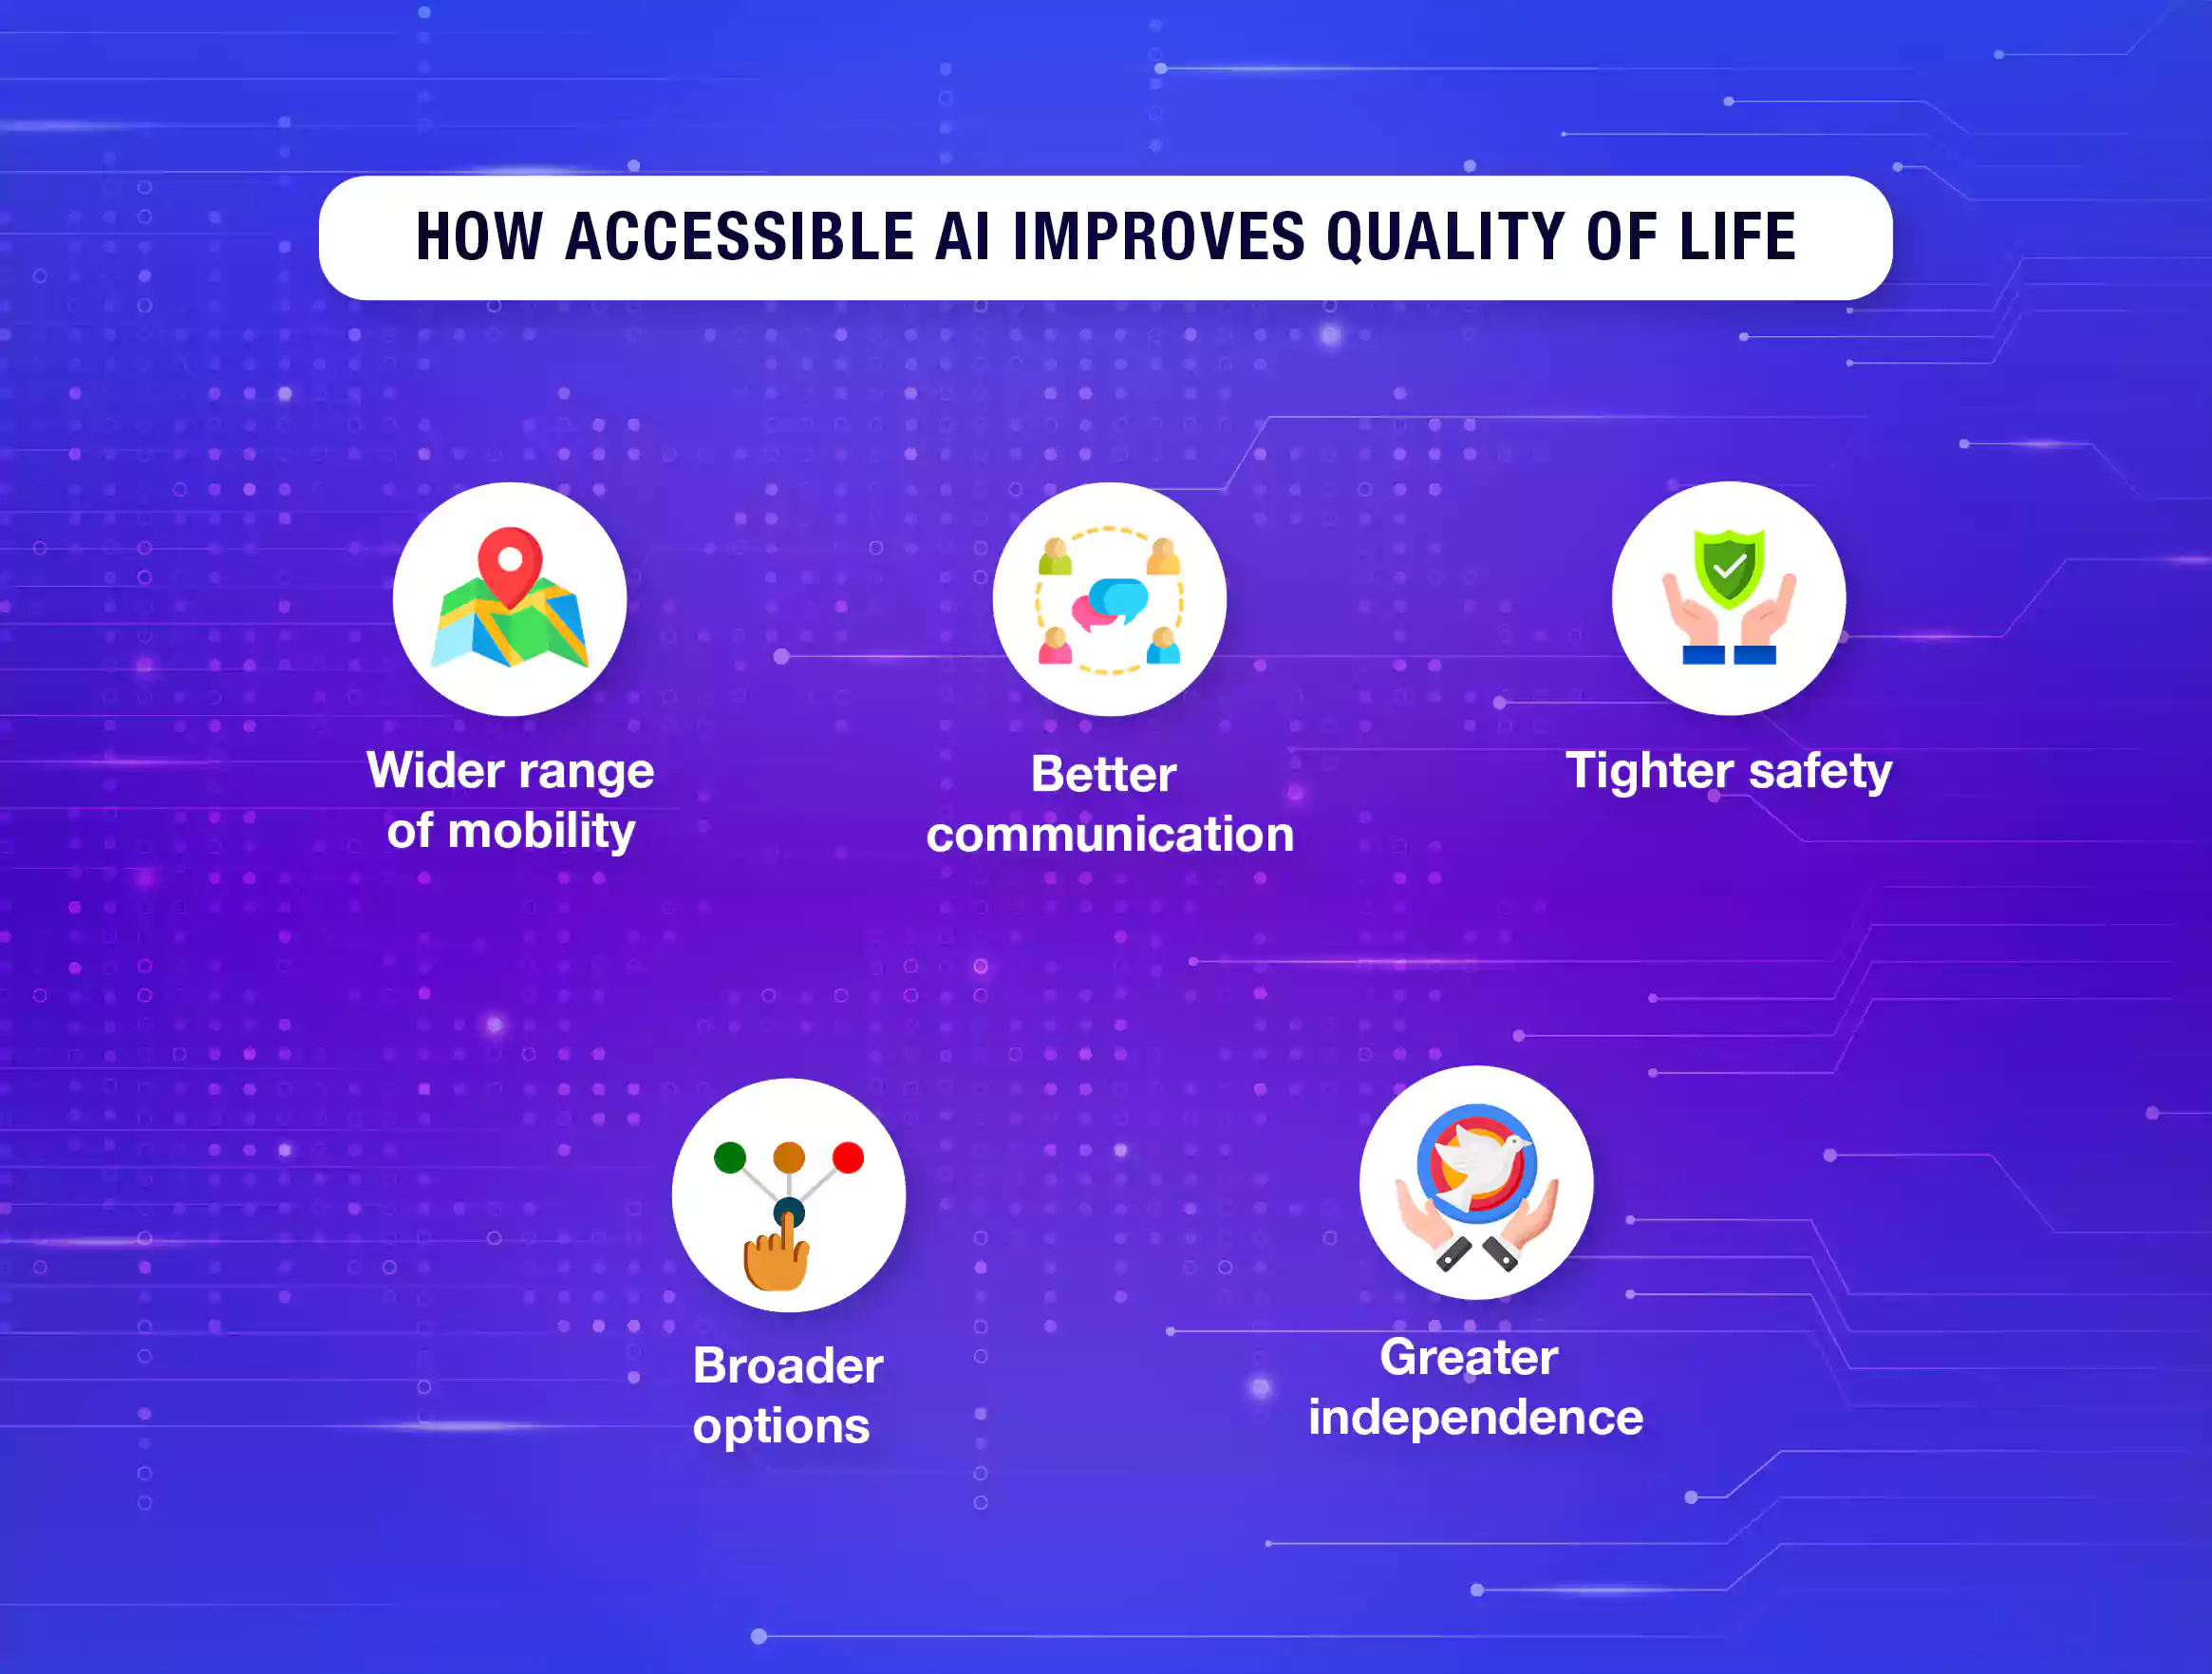 How accessible AI improves quality of life